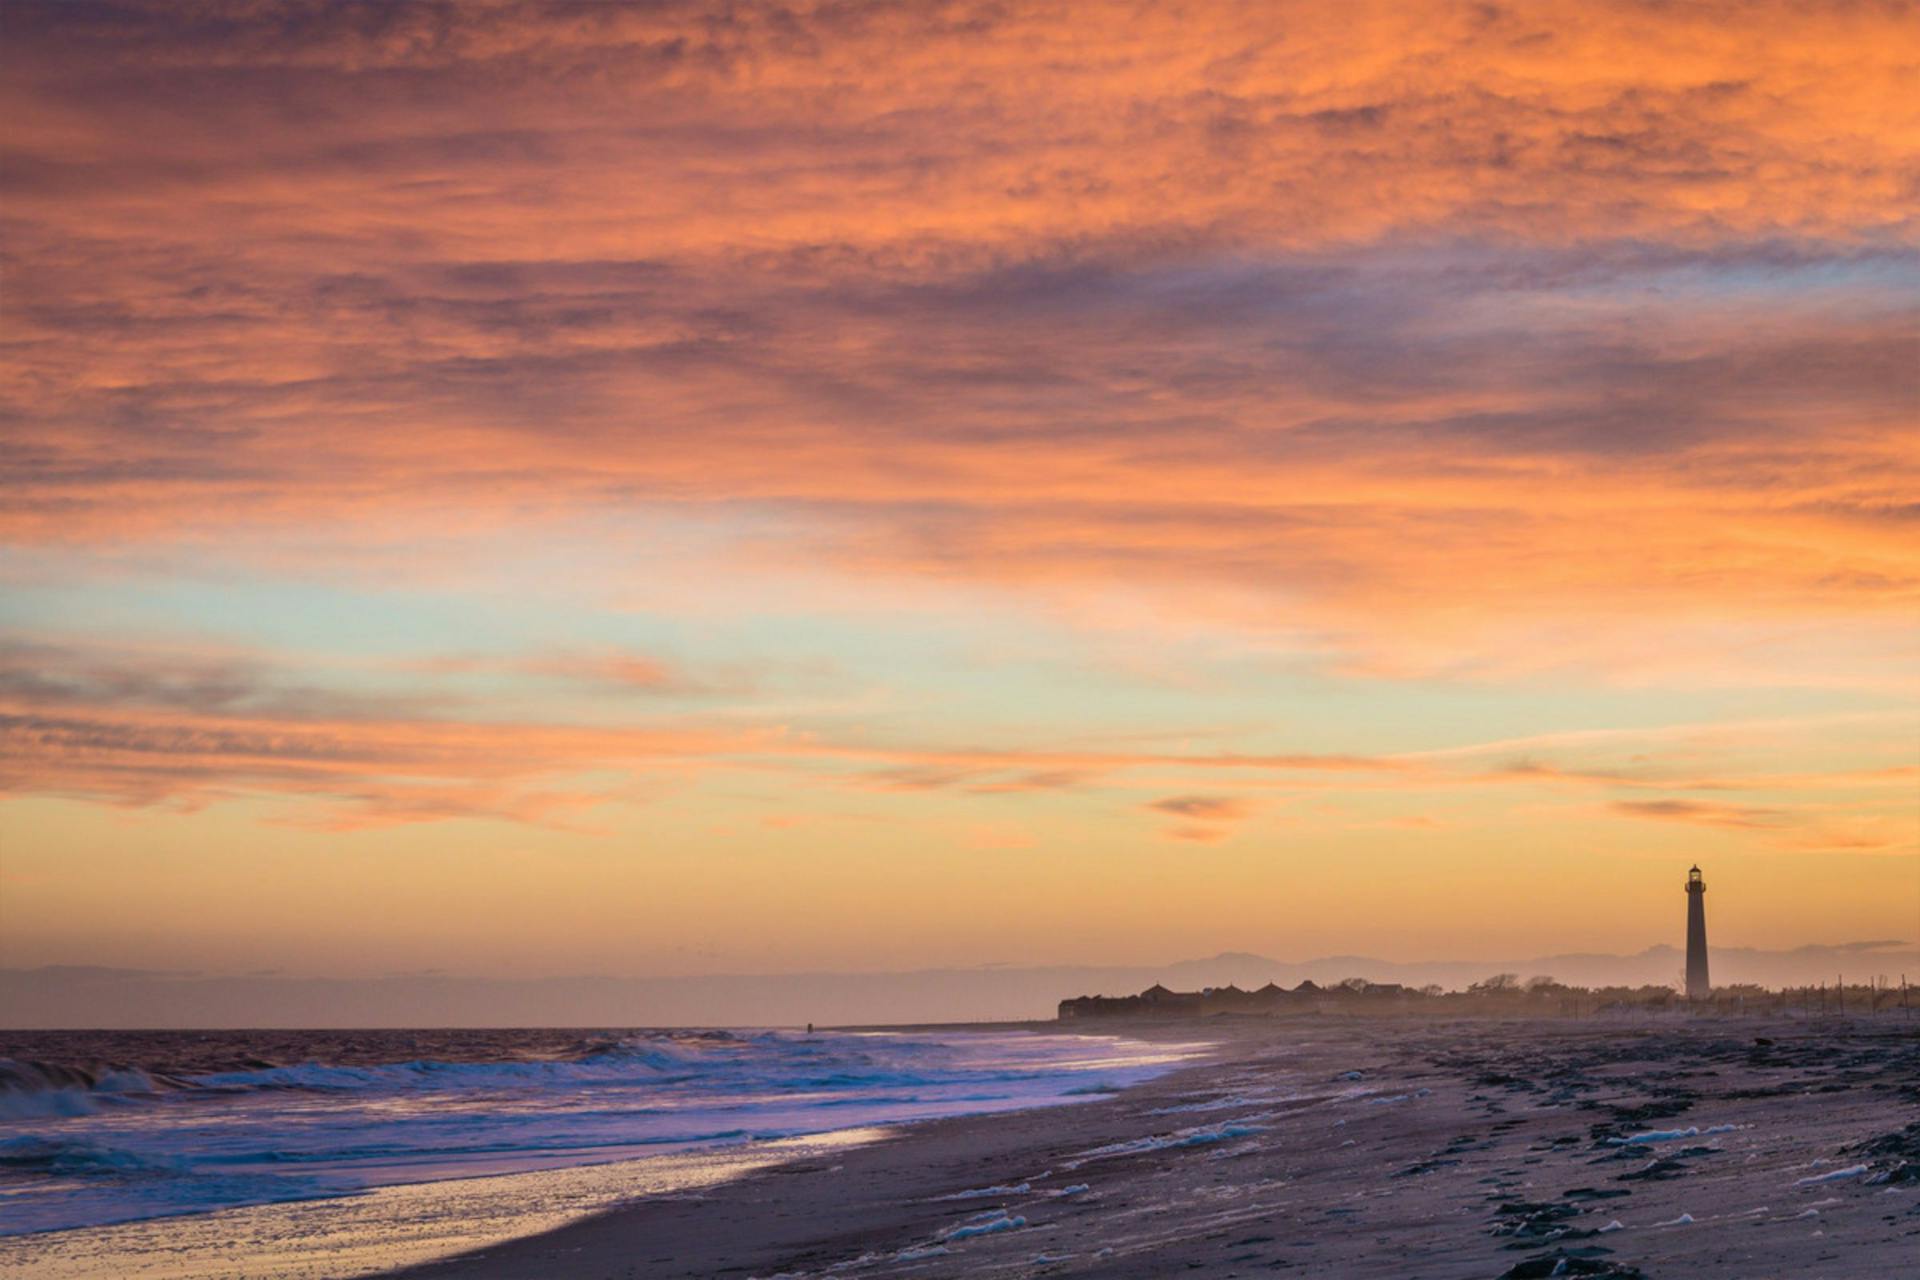 10 Best Campgrounds Near Cape May, NJ?